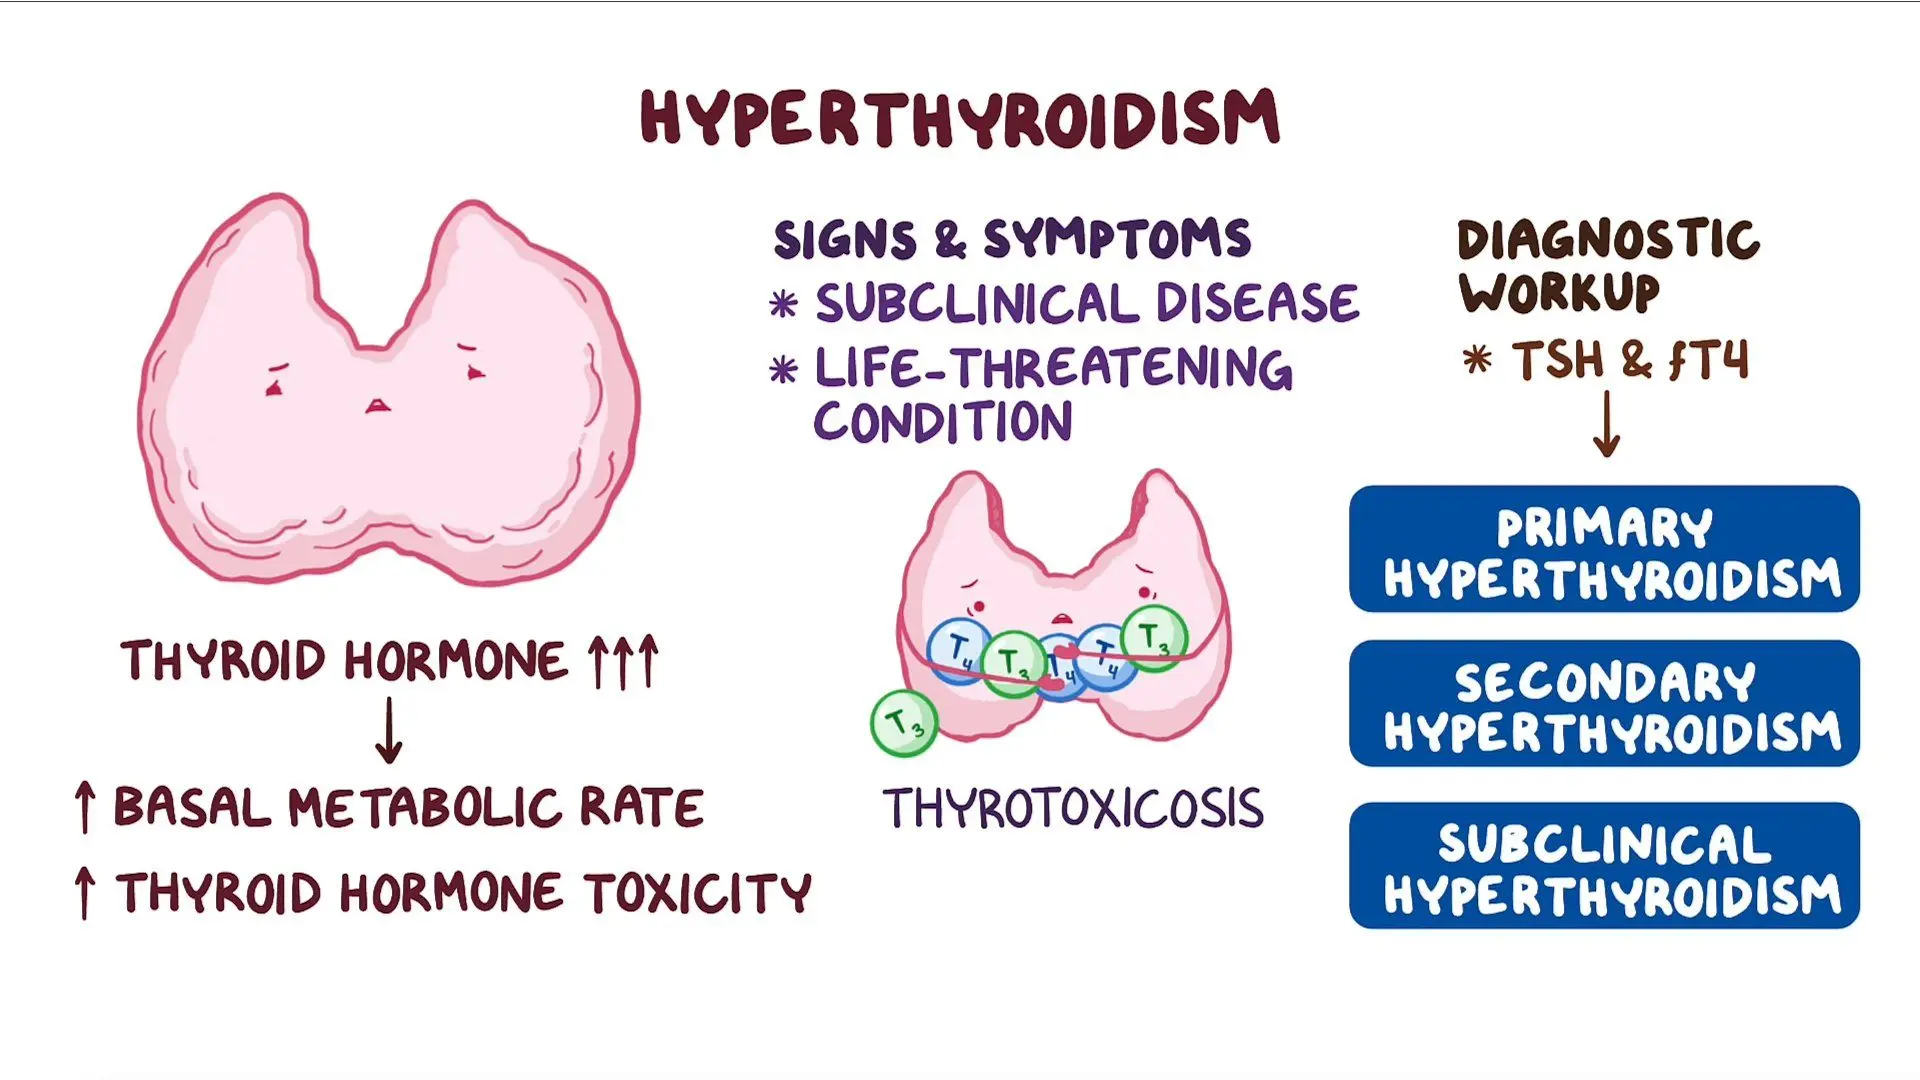 <p>Secondary thyrotoxicosis occurs when tumours of the anterior pituitary gland lead to the overproduction of thyroid-stimulating hormone (TSH), stimulating the thyroid gland excessively.</p>